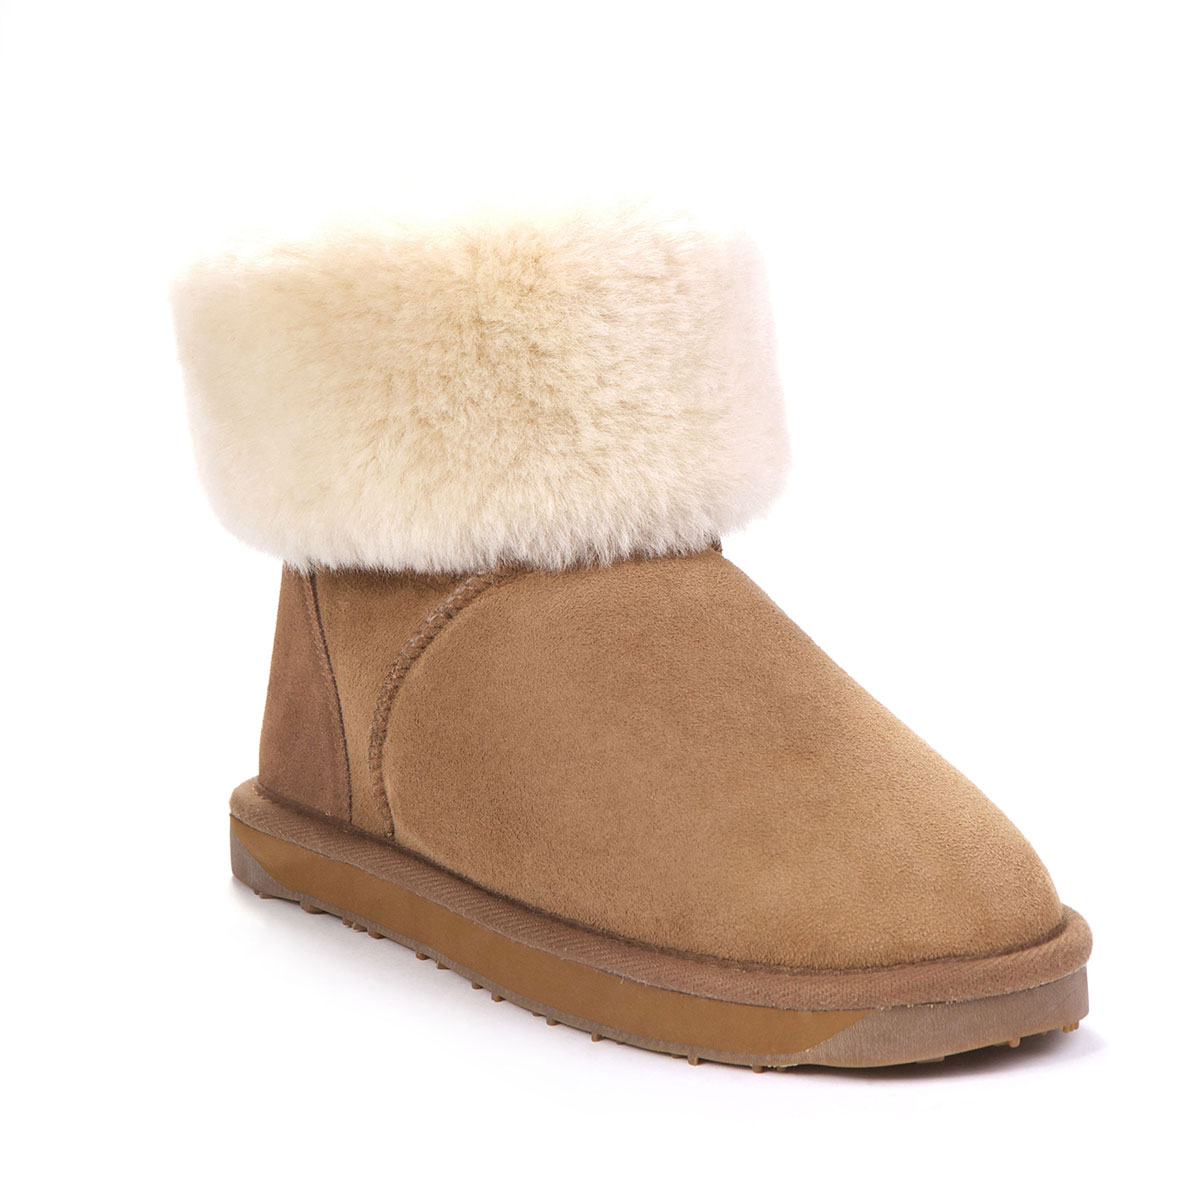 Ladies Cornwall Sheepskin Boots | Just Sheepskin Slippers and Boots